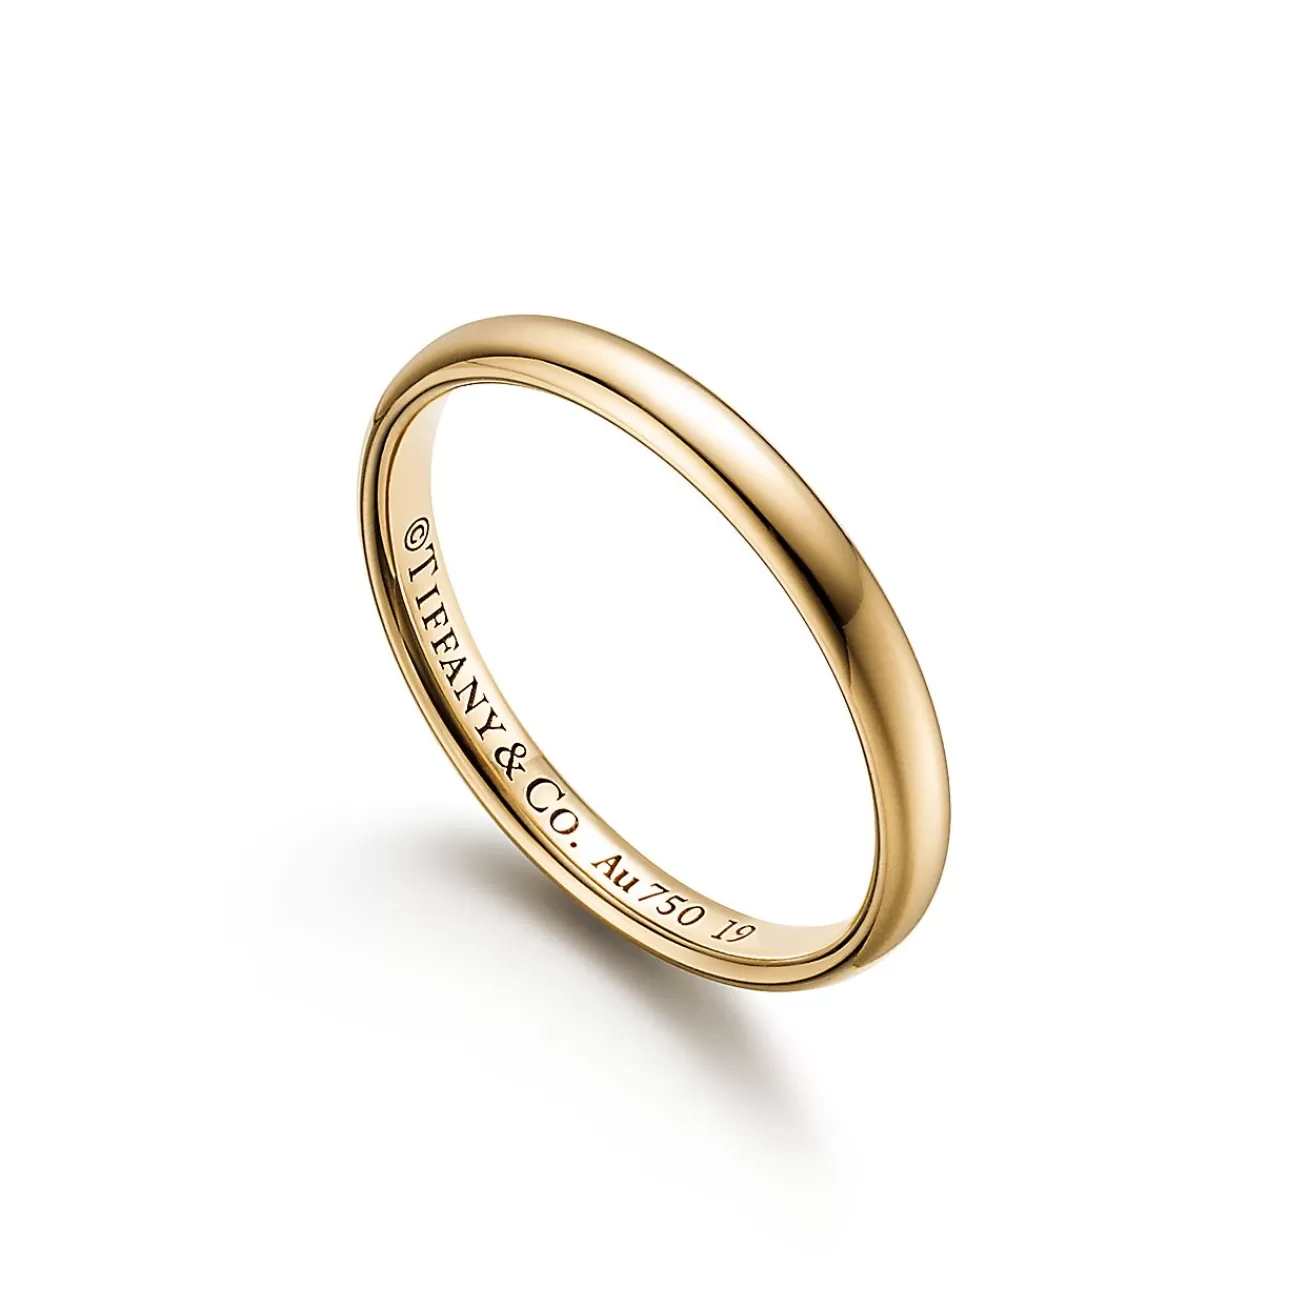 Tiffany & Co. Tiffany Forever Wedding Band Ring in Yellow Gold, 2.5 mm Wide | ^Women Rings | Gold Jewelry